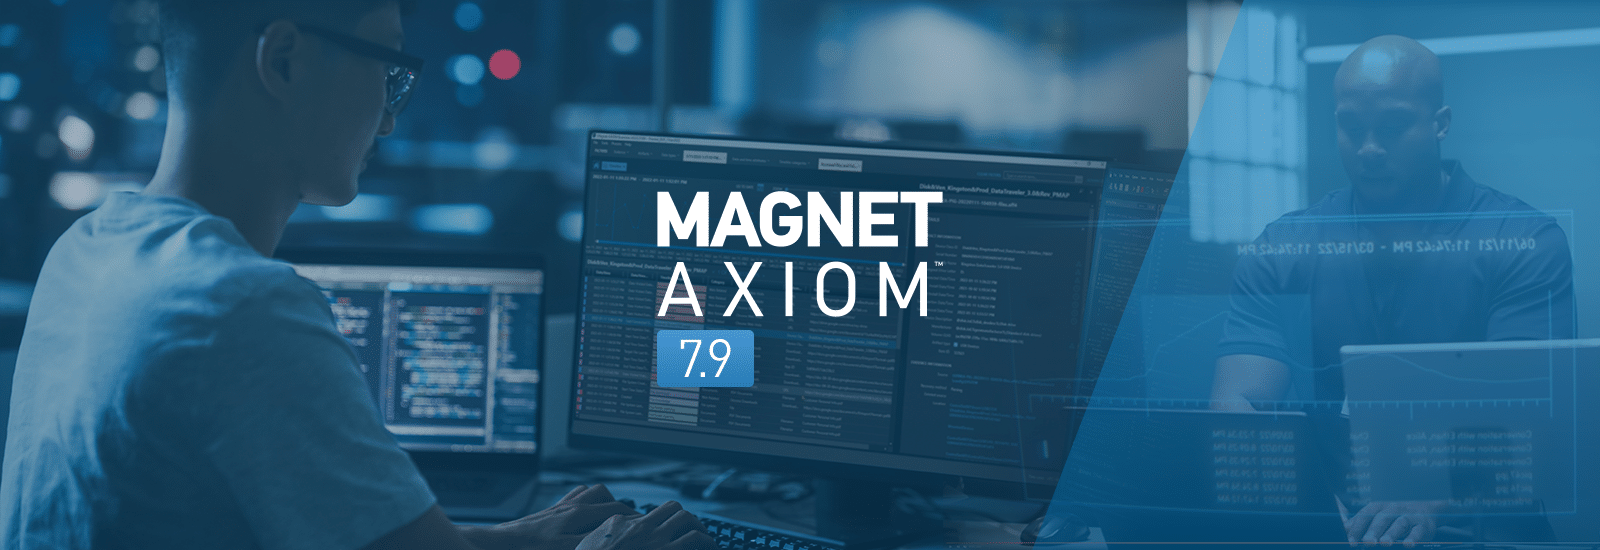 A decorative header for the Magnet AXIOM 7.9 release.